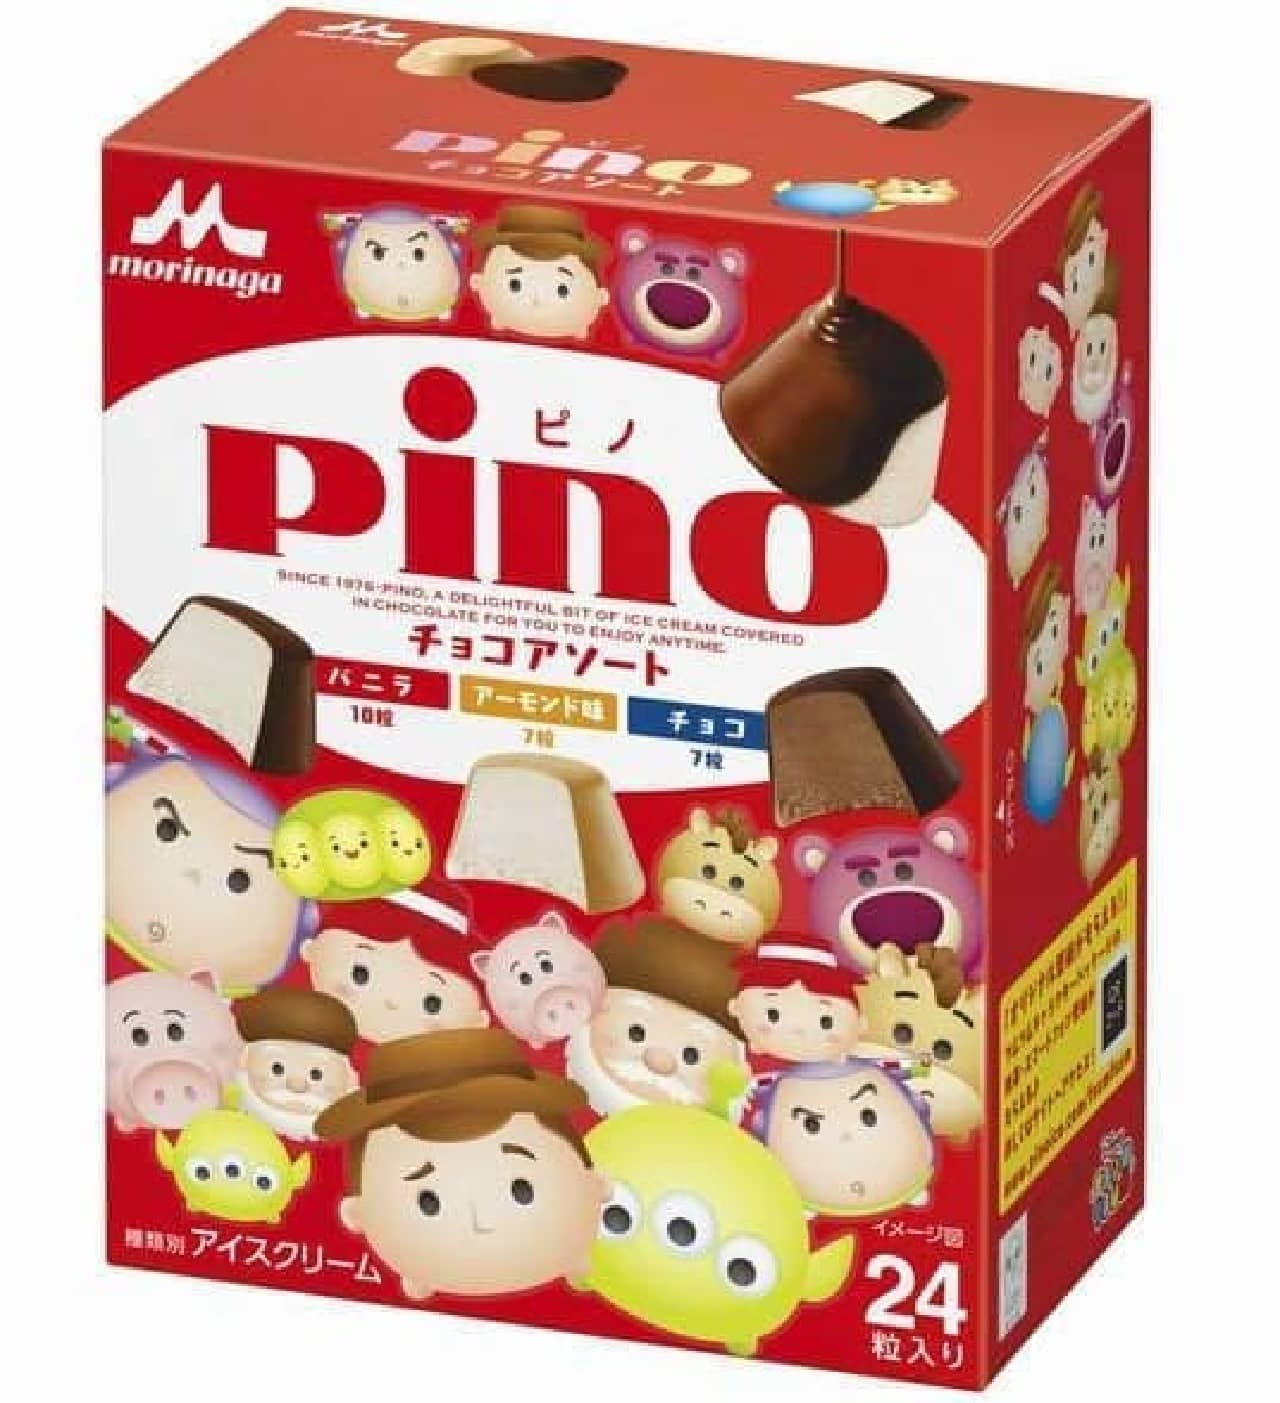 The classic chocolate sort has also been changed to a Tsum Tsum design!